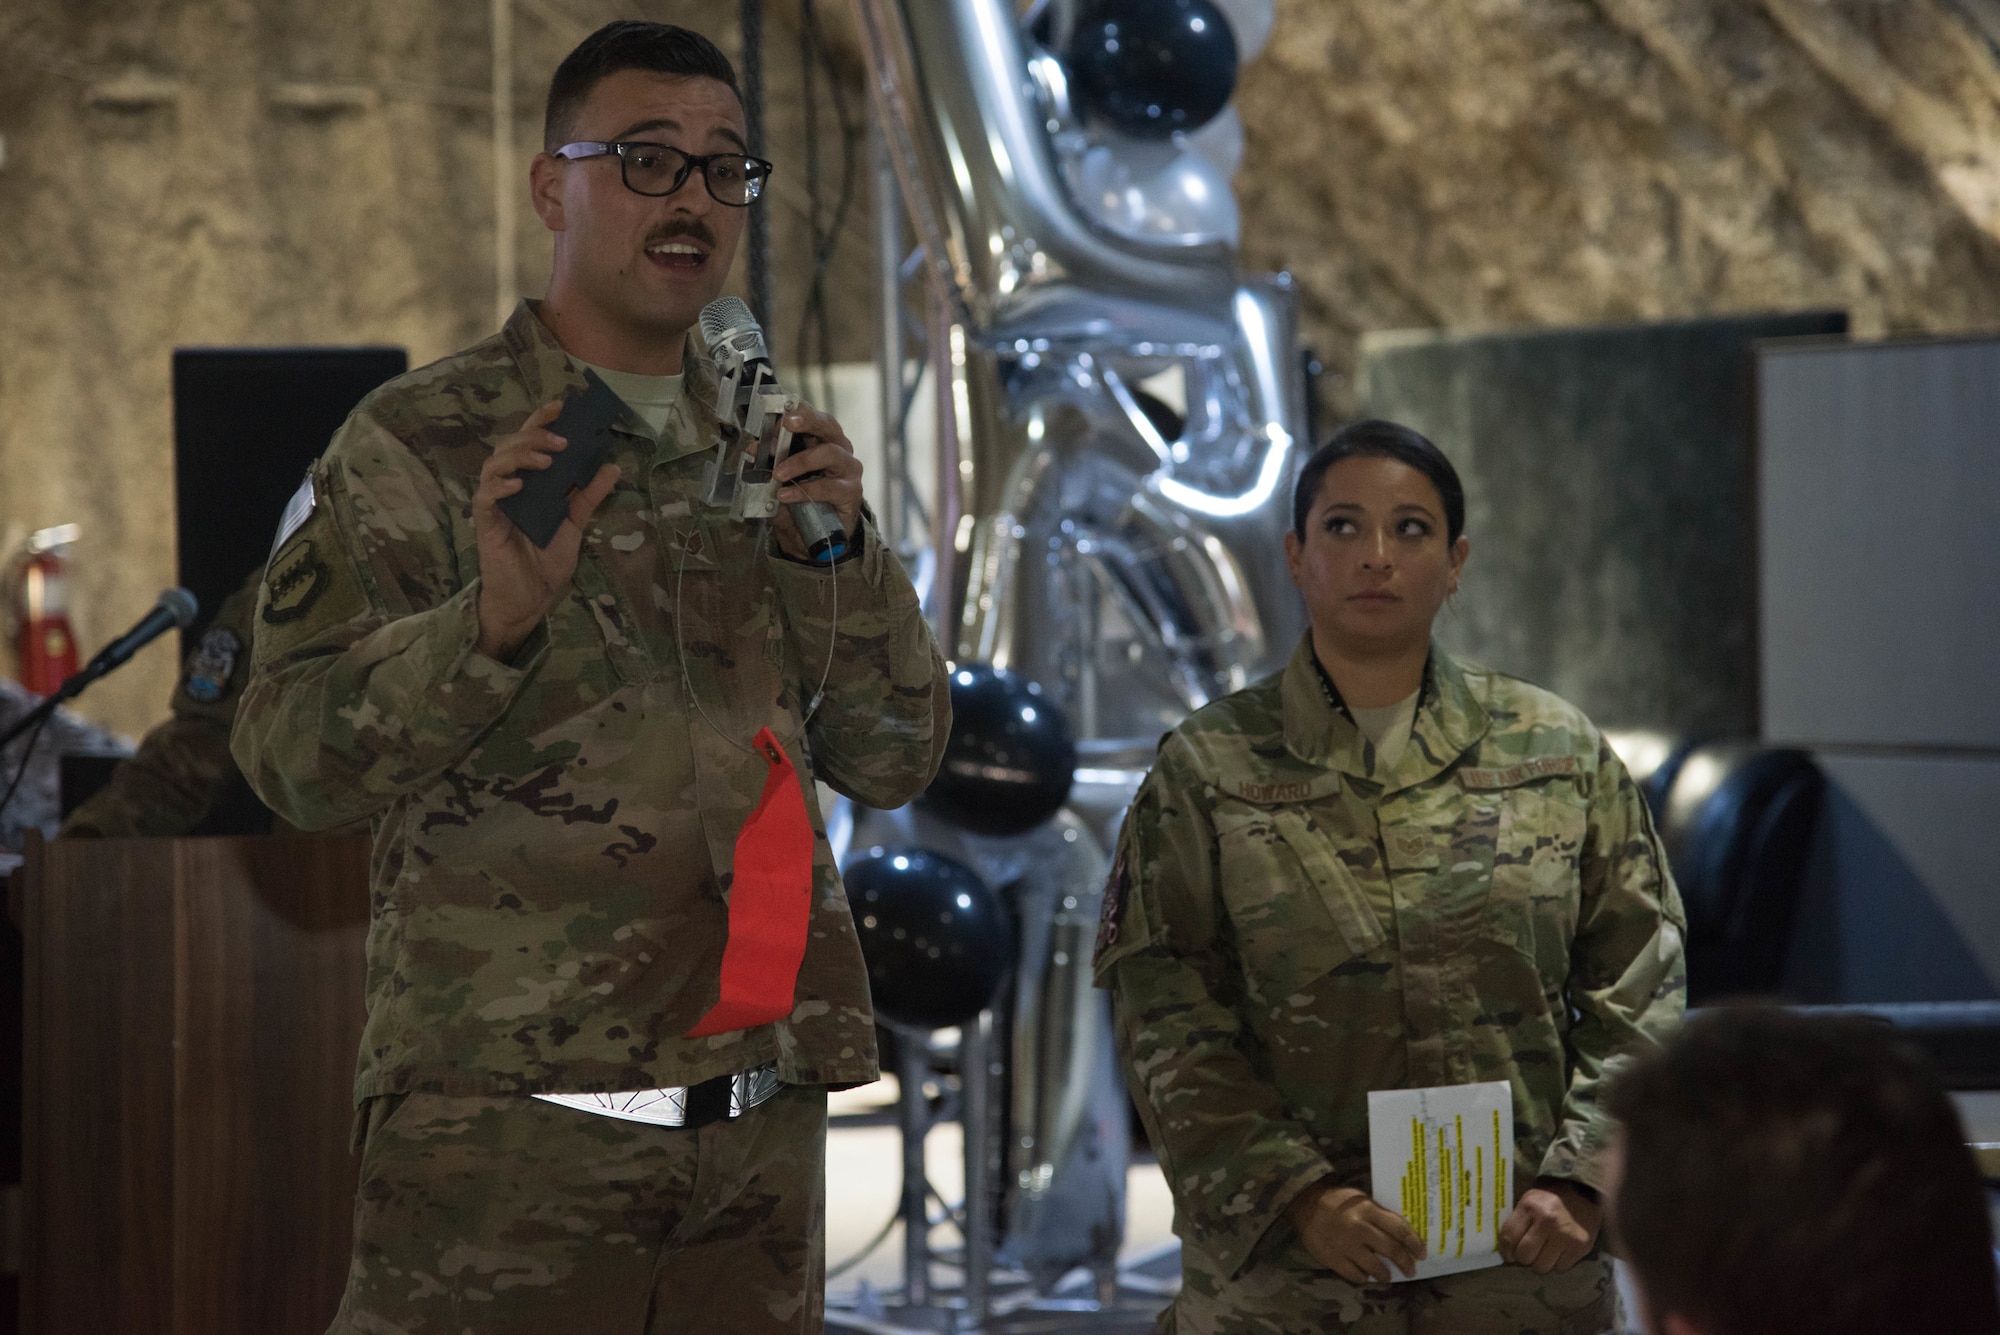 Tech. Sgt. Oralia Howard, 332nd Expeditionary Maintenance Group quality assurance chief inspector, and Staff Sgt. Nathan Newton, 332nd Expeditionary Maintenance Squadron aircraft structural maintenance technician, answer questions for the judges during the first Red Tails Commander’s Innovation Challenge, Sept. 28, 2018, at an undisclosed location in Southwest Asia.